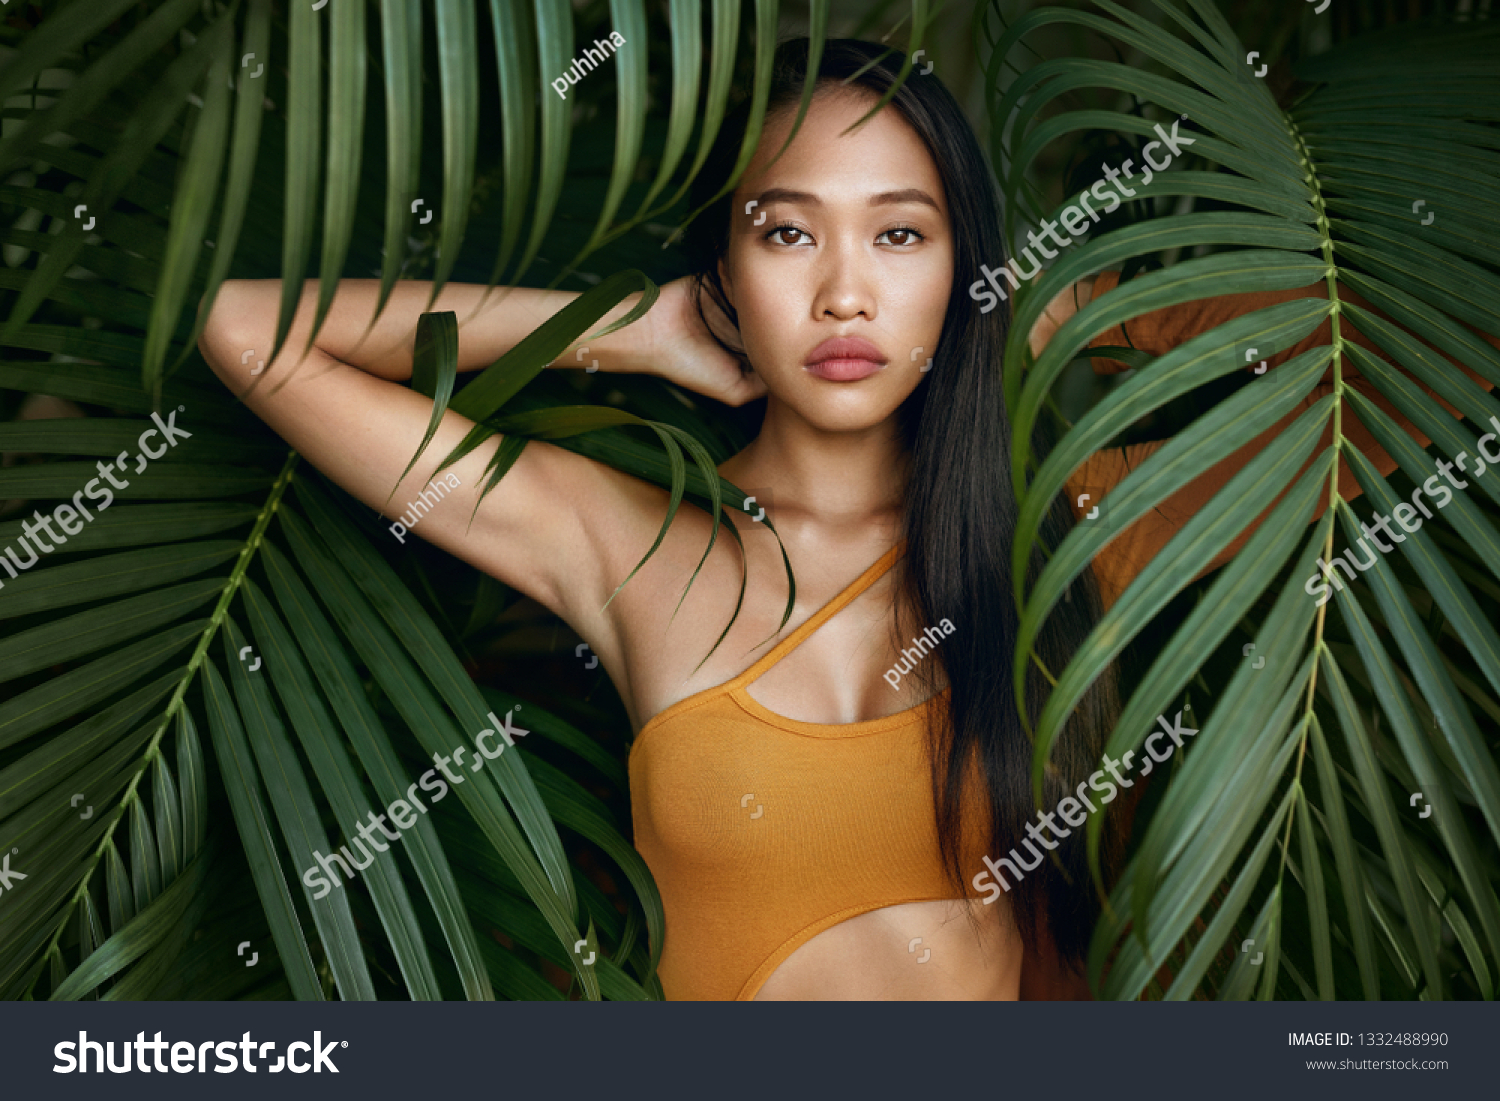 Beauty. Woman model with long straight hair and palm leaves. Asian girl with beautiful exotic face at tropical nature